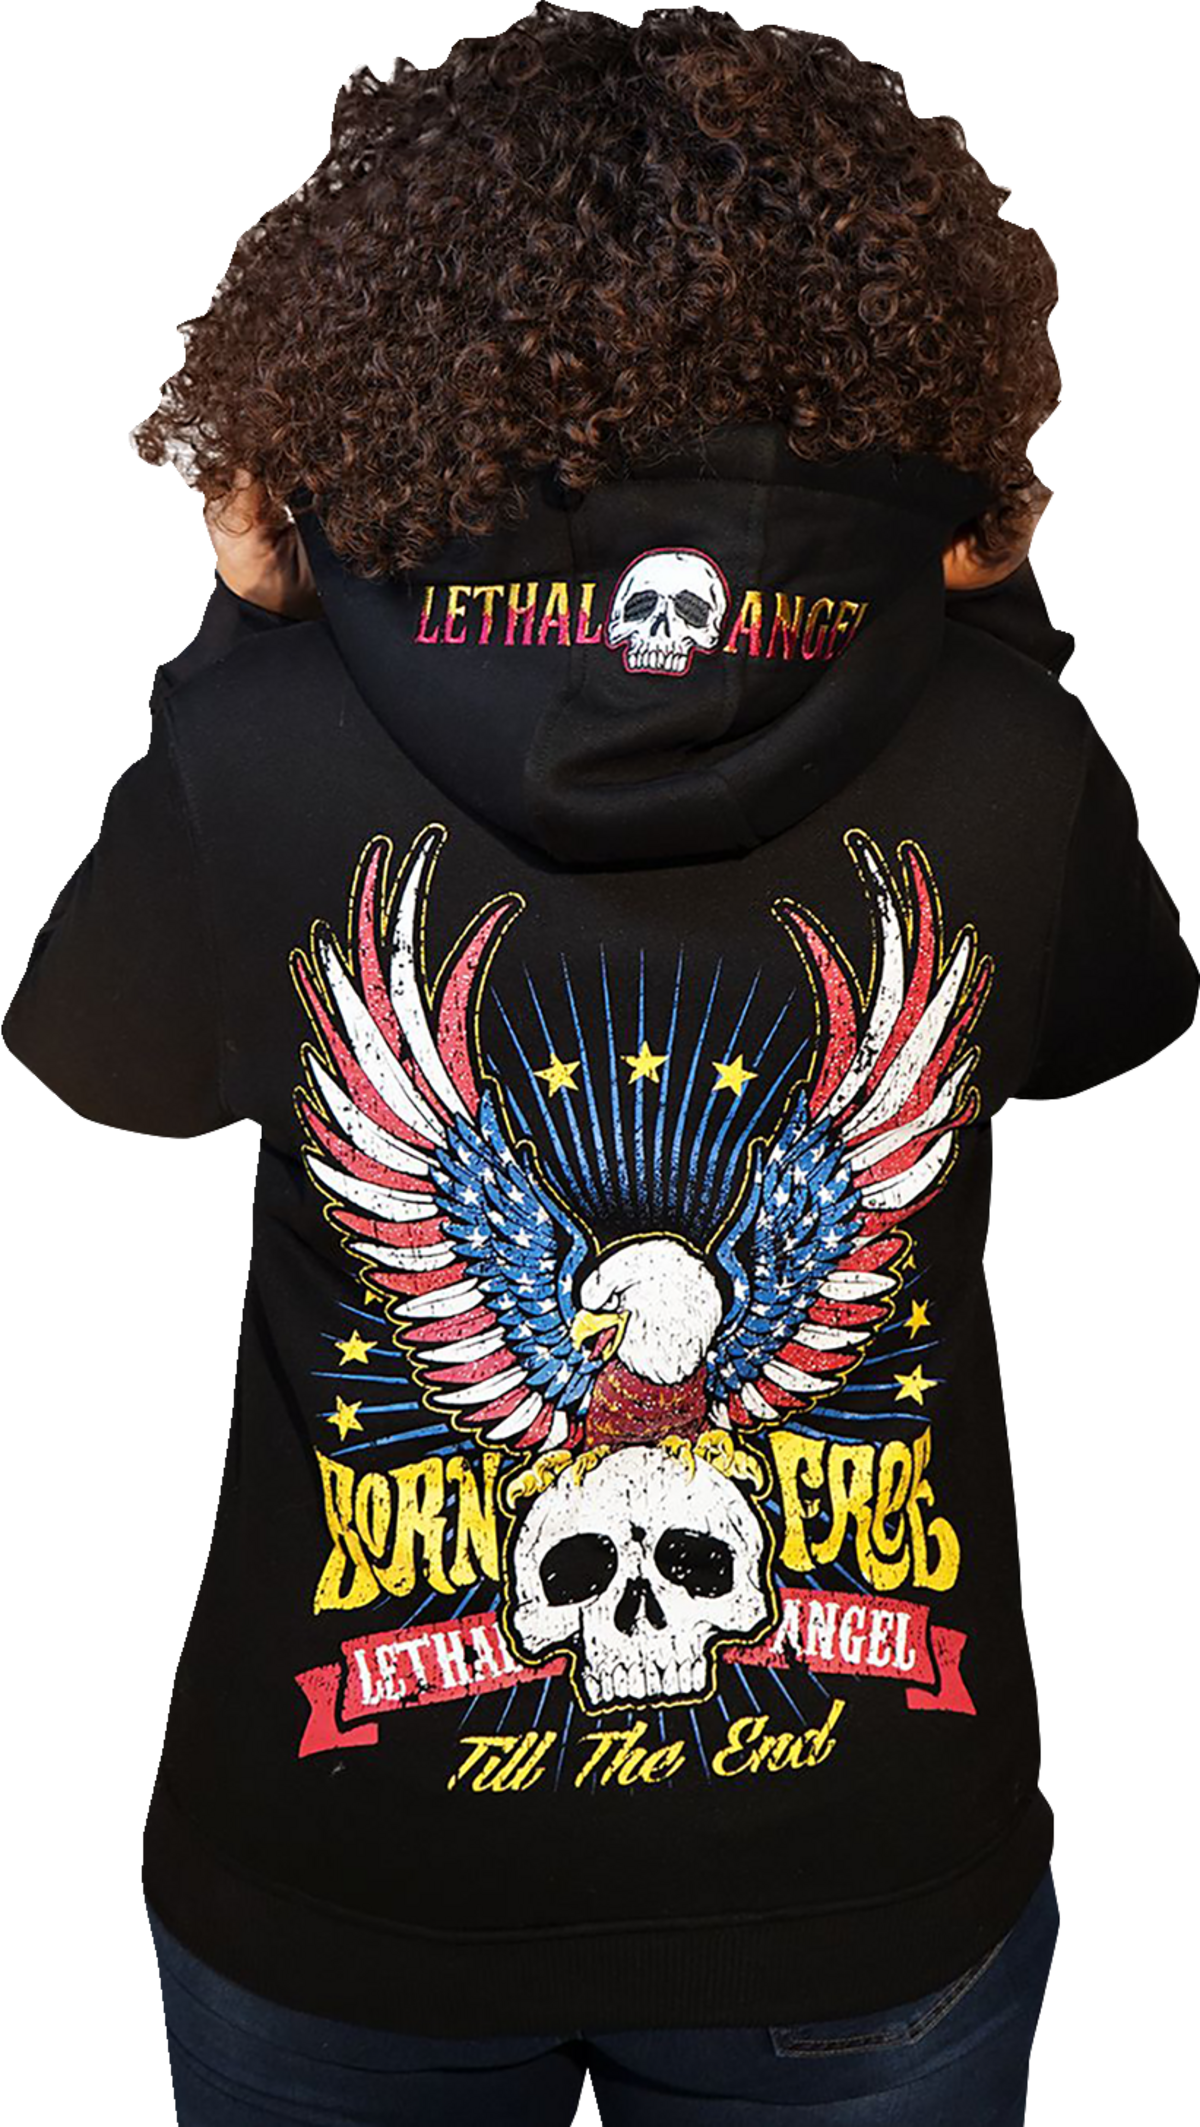 LETHAL THREAT Women's Born Free Zip Up Hoodie - Black - Small HD84072S